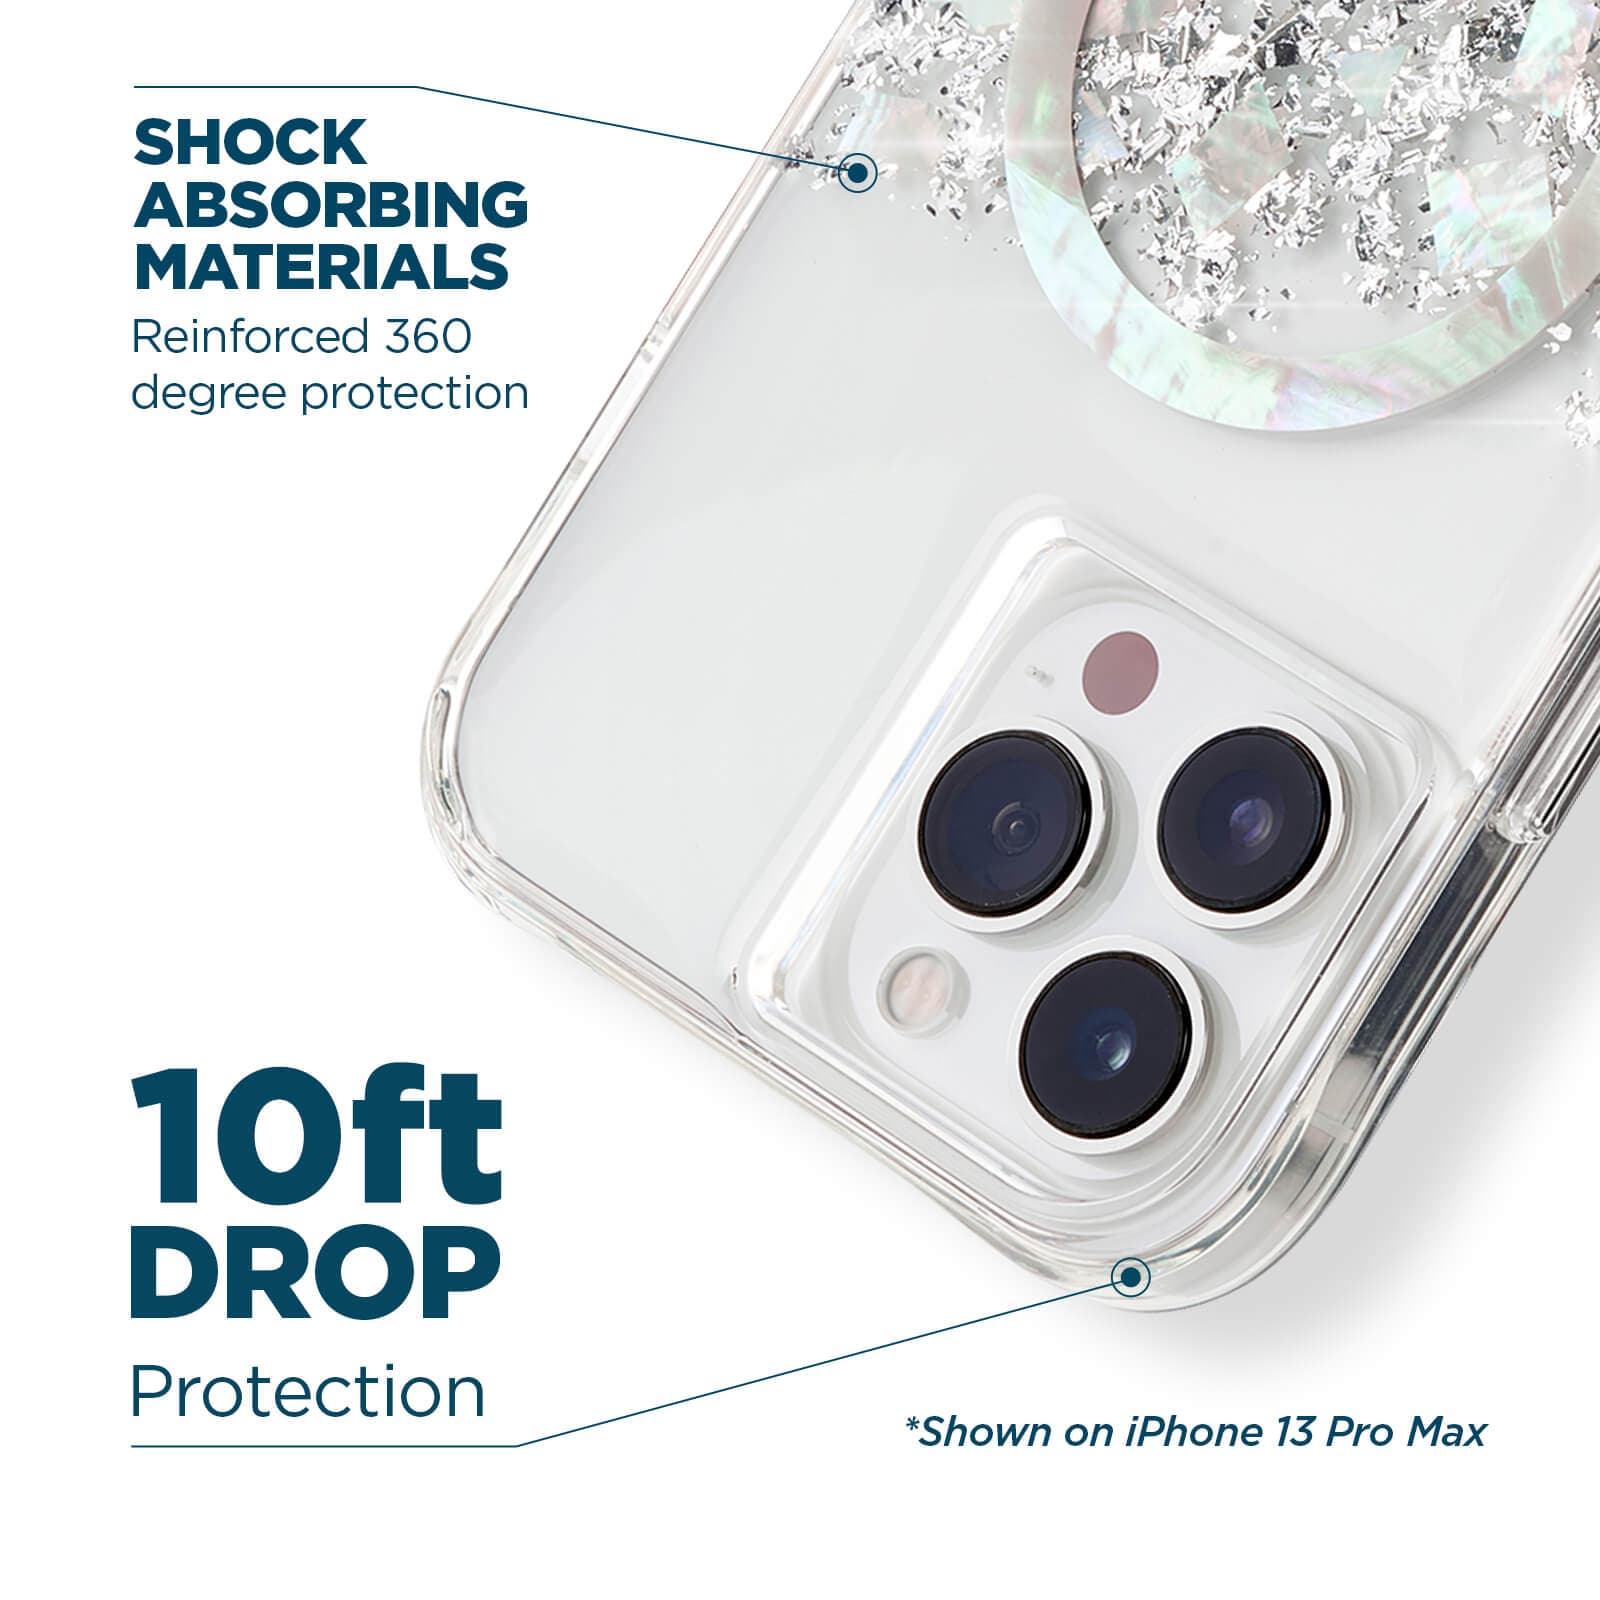 Shock absorbing materials reinforced 360 degree protection. 10ft drop protection. Shown on iPhone 13 Pro Max. color::Pearl